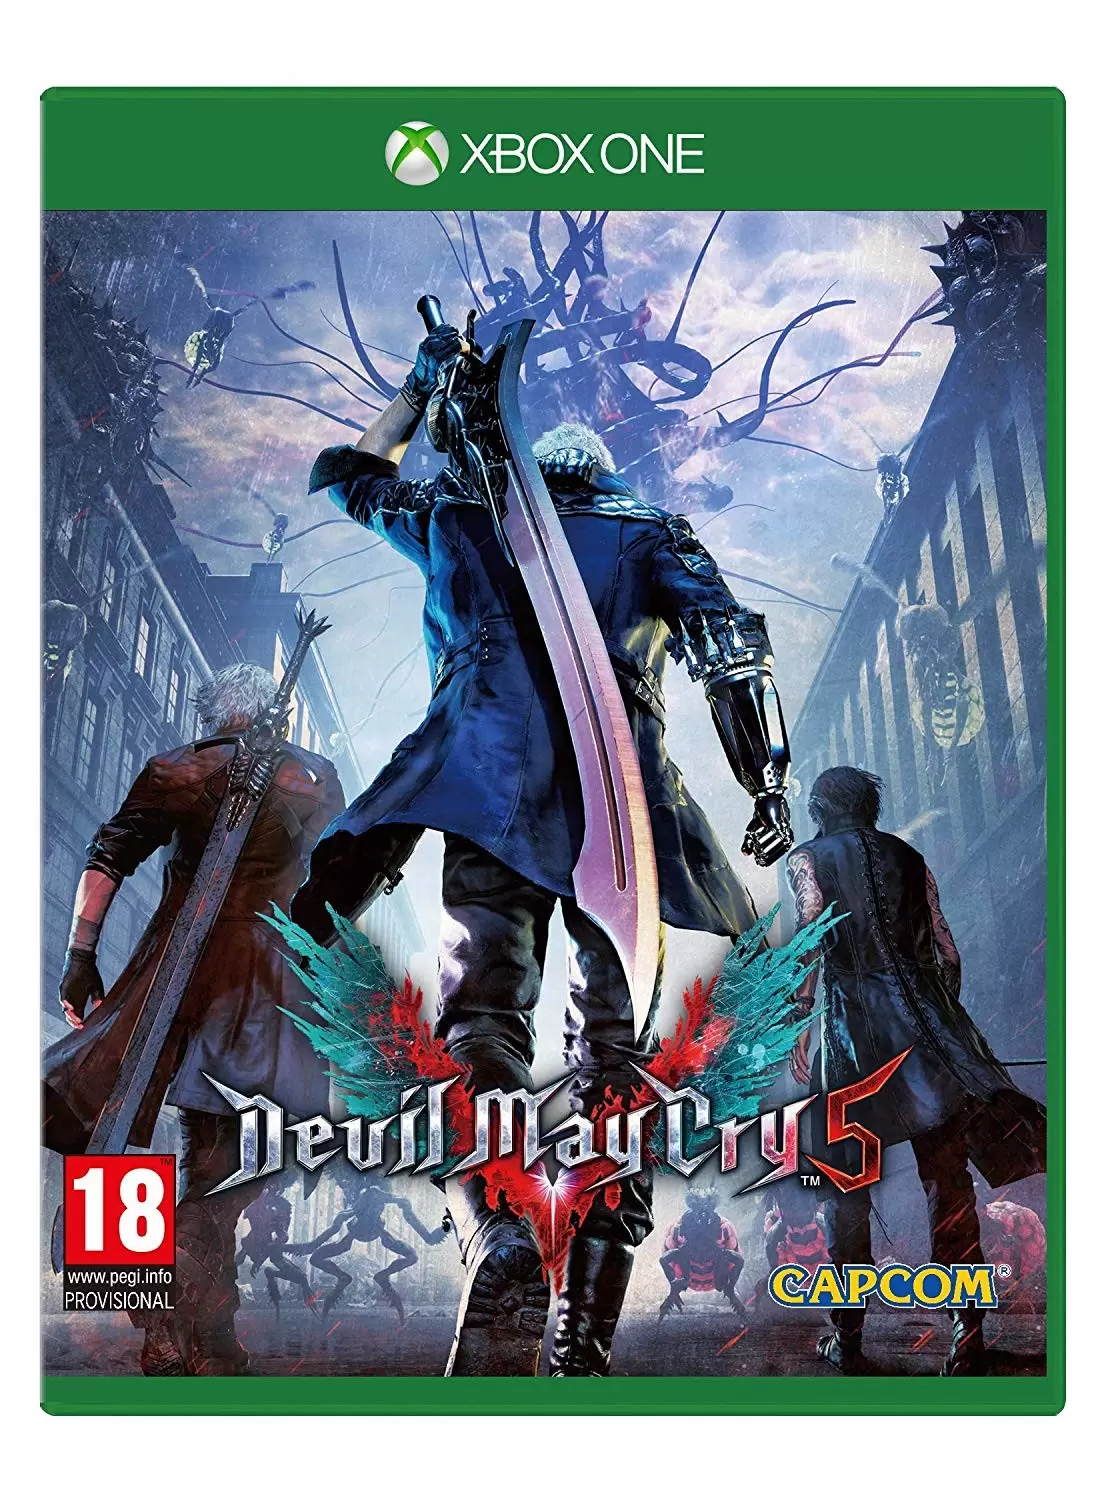 XBOX One Games - Devil May Cry 5